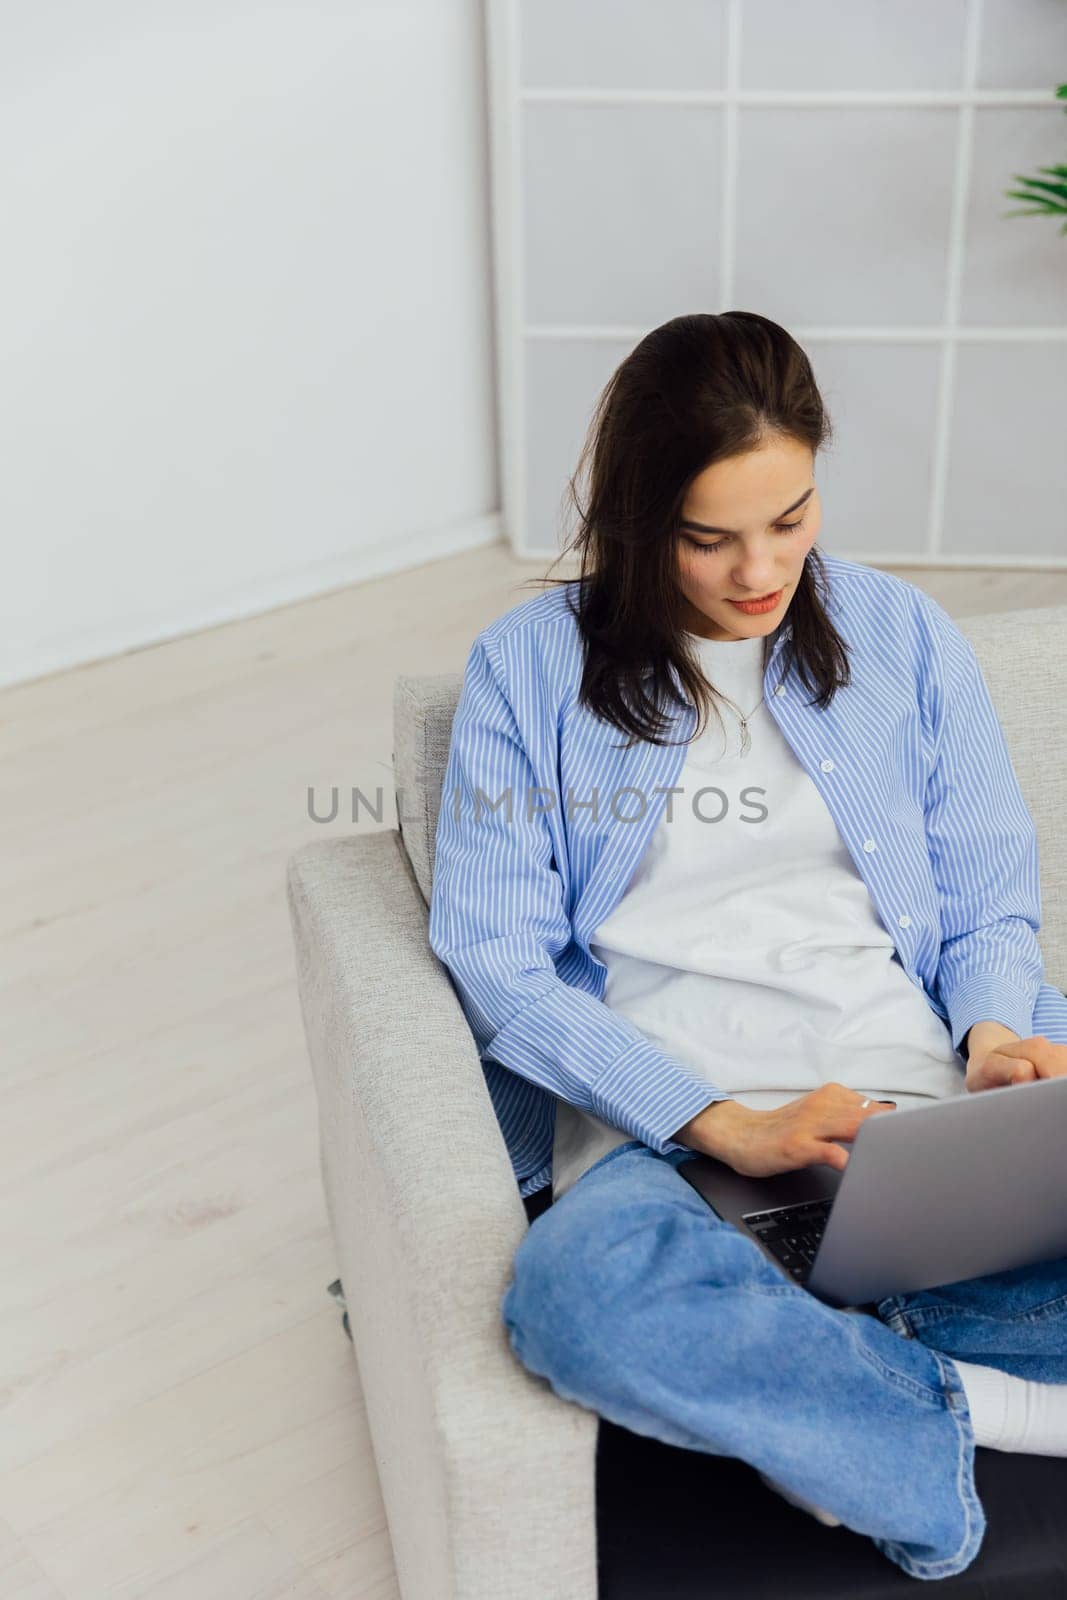 a woman working online at a computer from home by Simakov